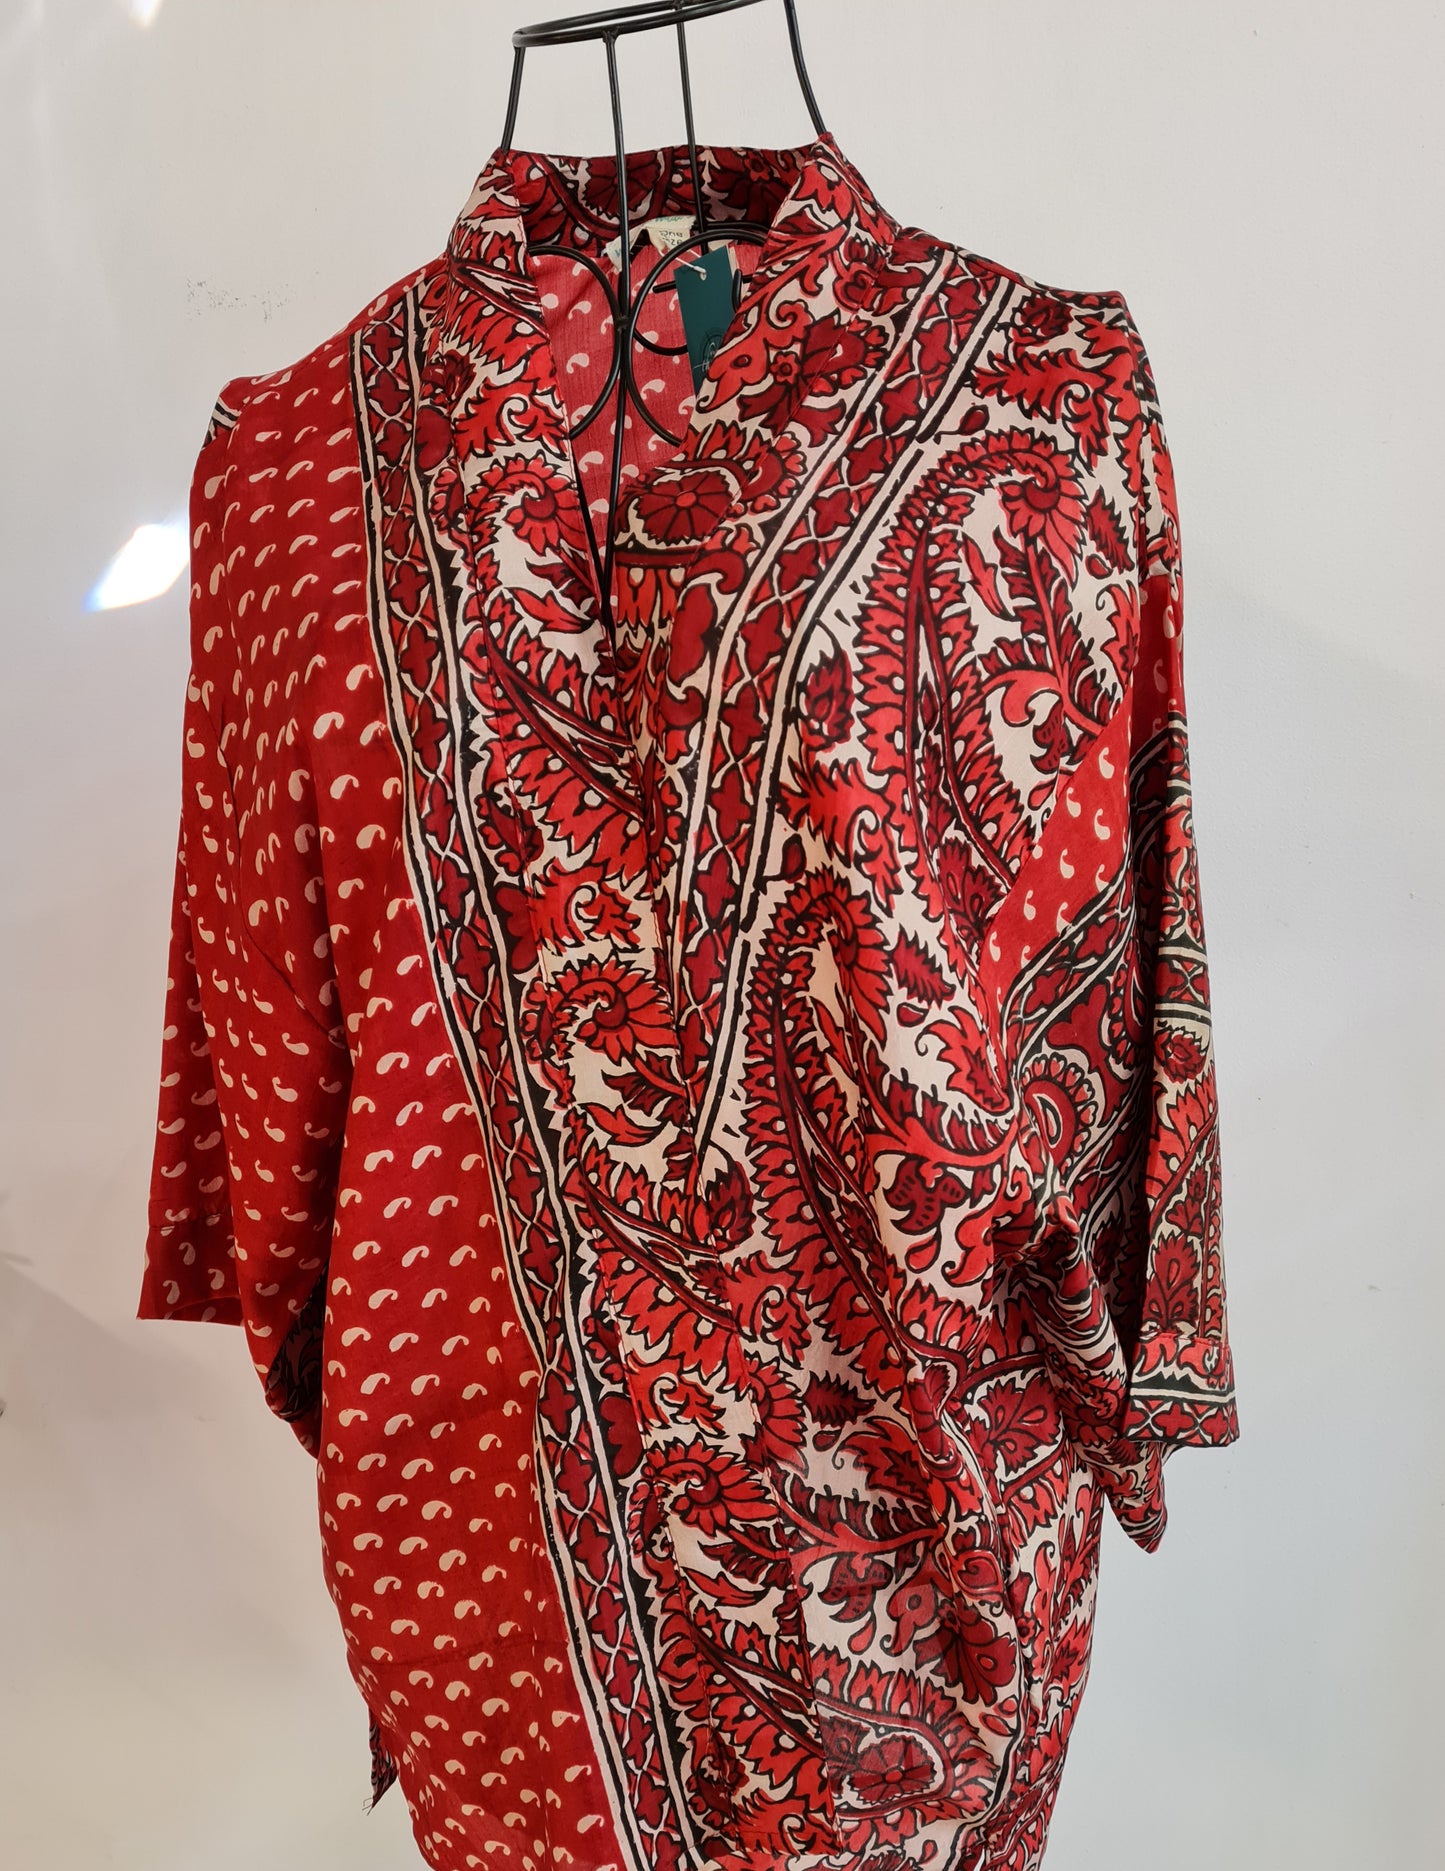 a red and white muse jacket crossed over a wire mannequin. 1/4 of the jacket is a deep red with small asymmetrical white dots evenly spaced across the surface. The other 3/4s is a large proportioned paisley pattern in shades of red against a white background. 